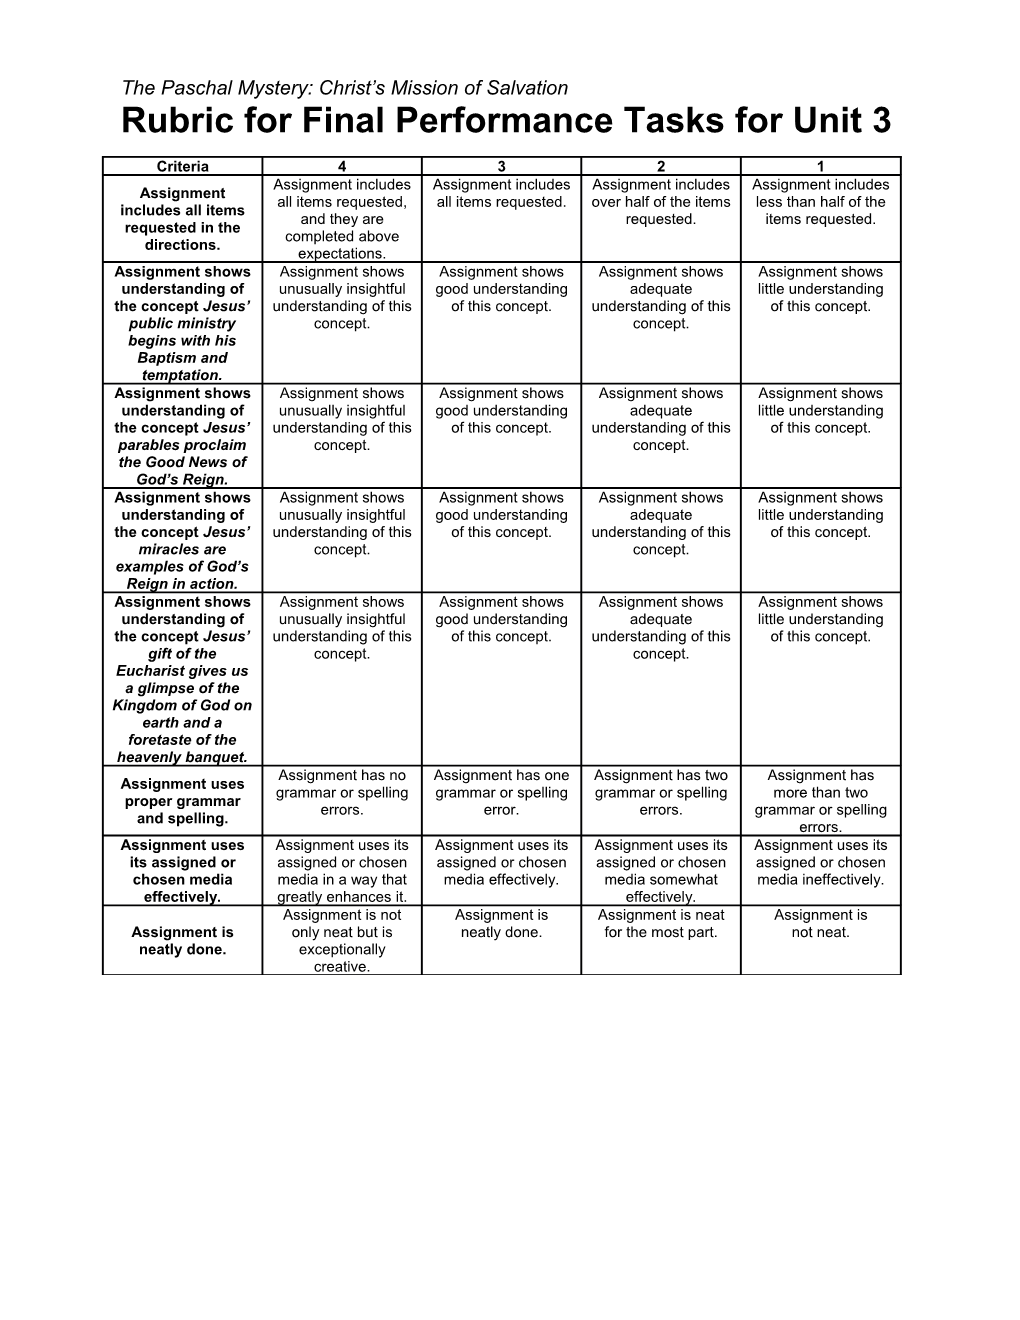 Rubric for Final Performance Tasks for Unit 3